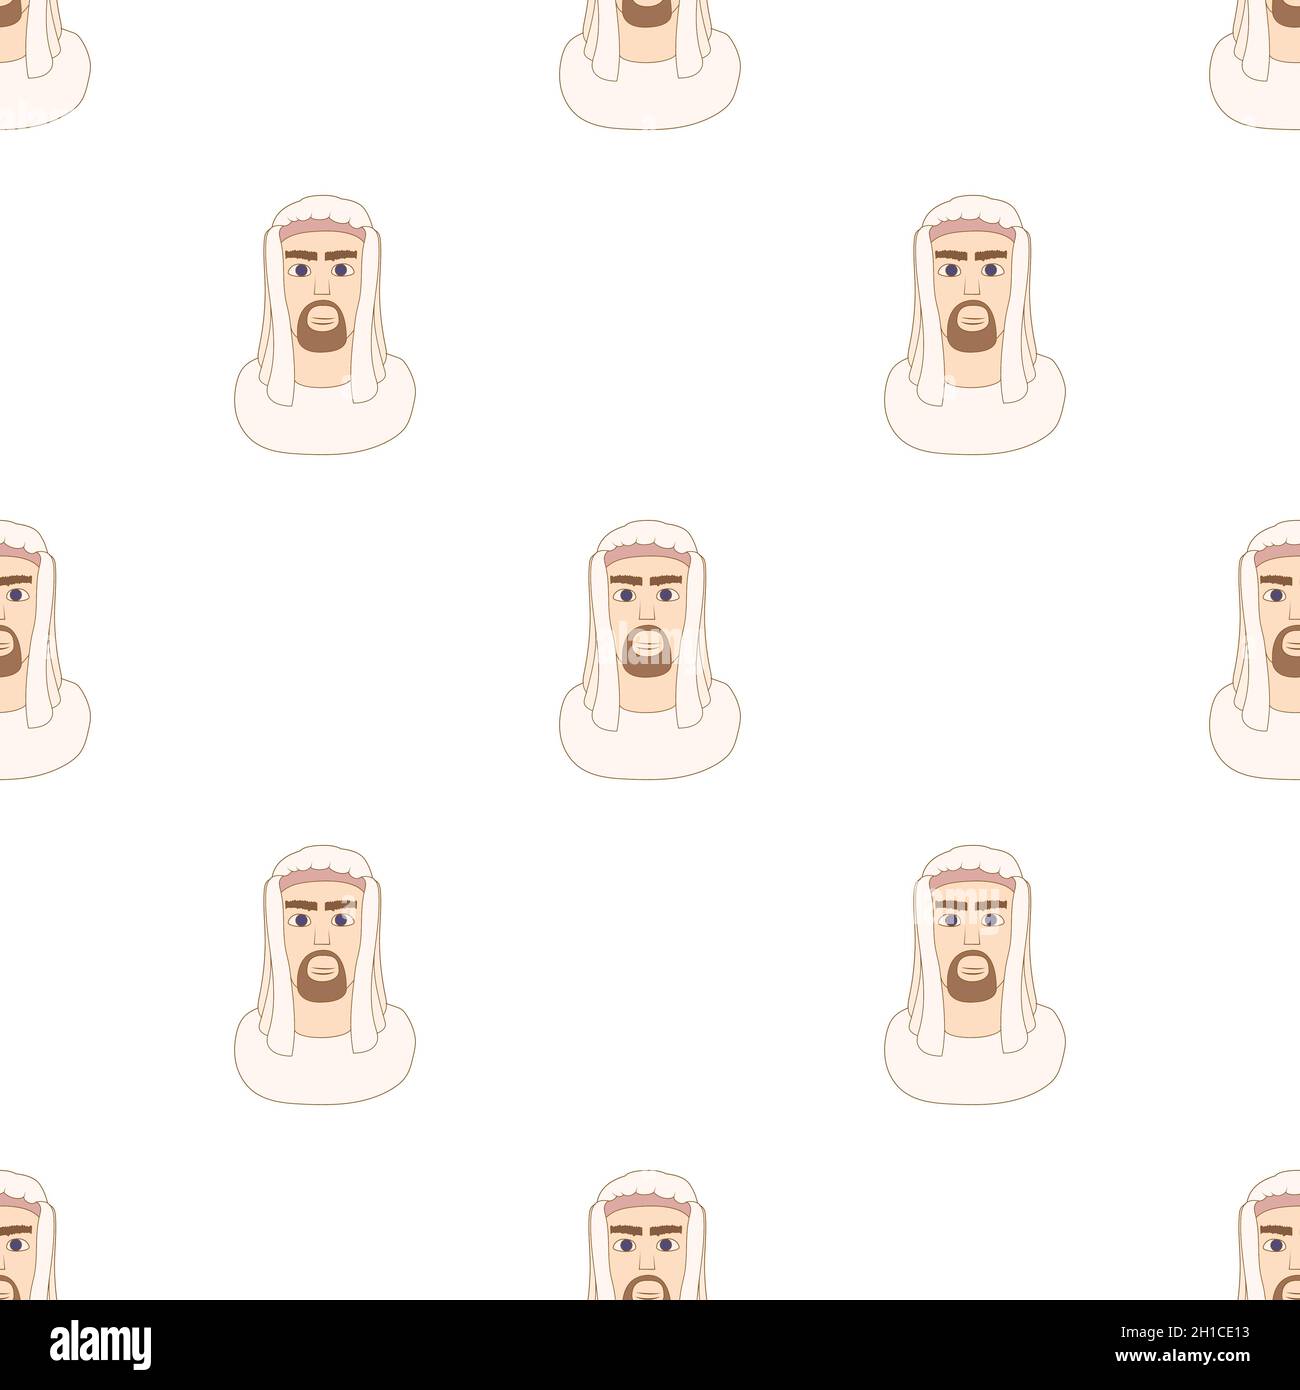 Arabic man in traditional muslim hat pattern seamless background texture repeat wallpaper geometric vector Stock Vector